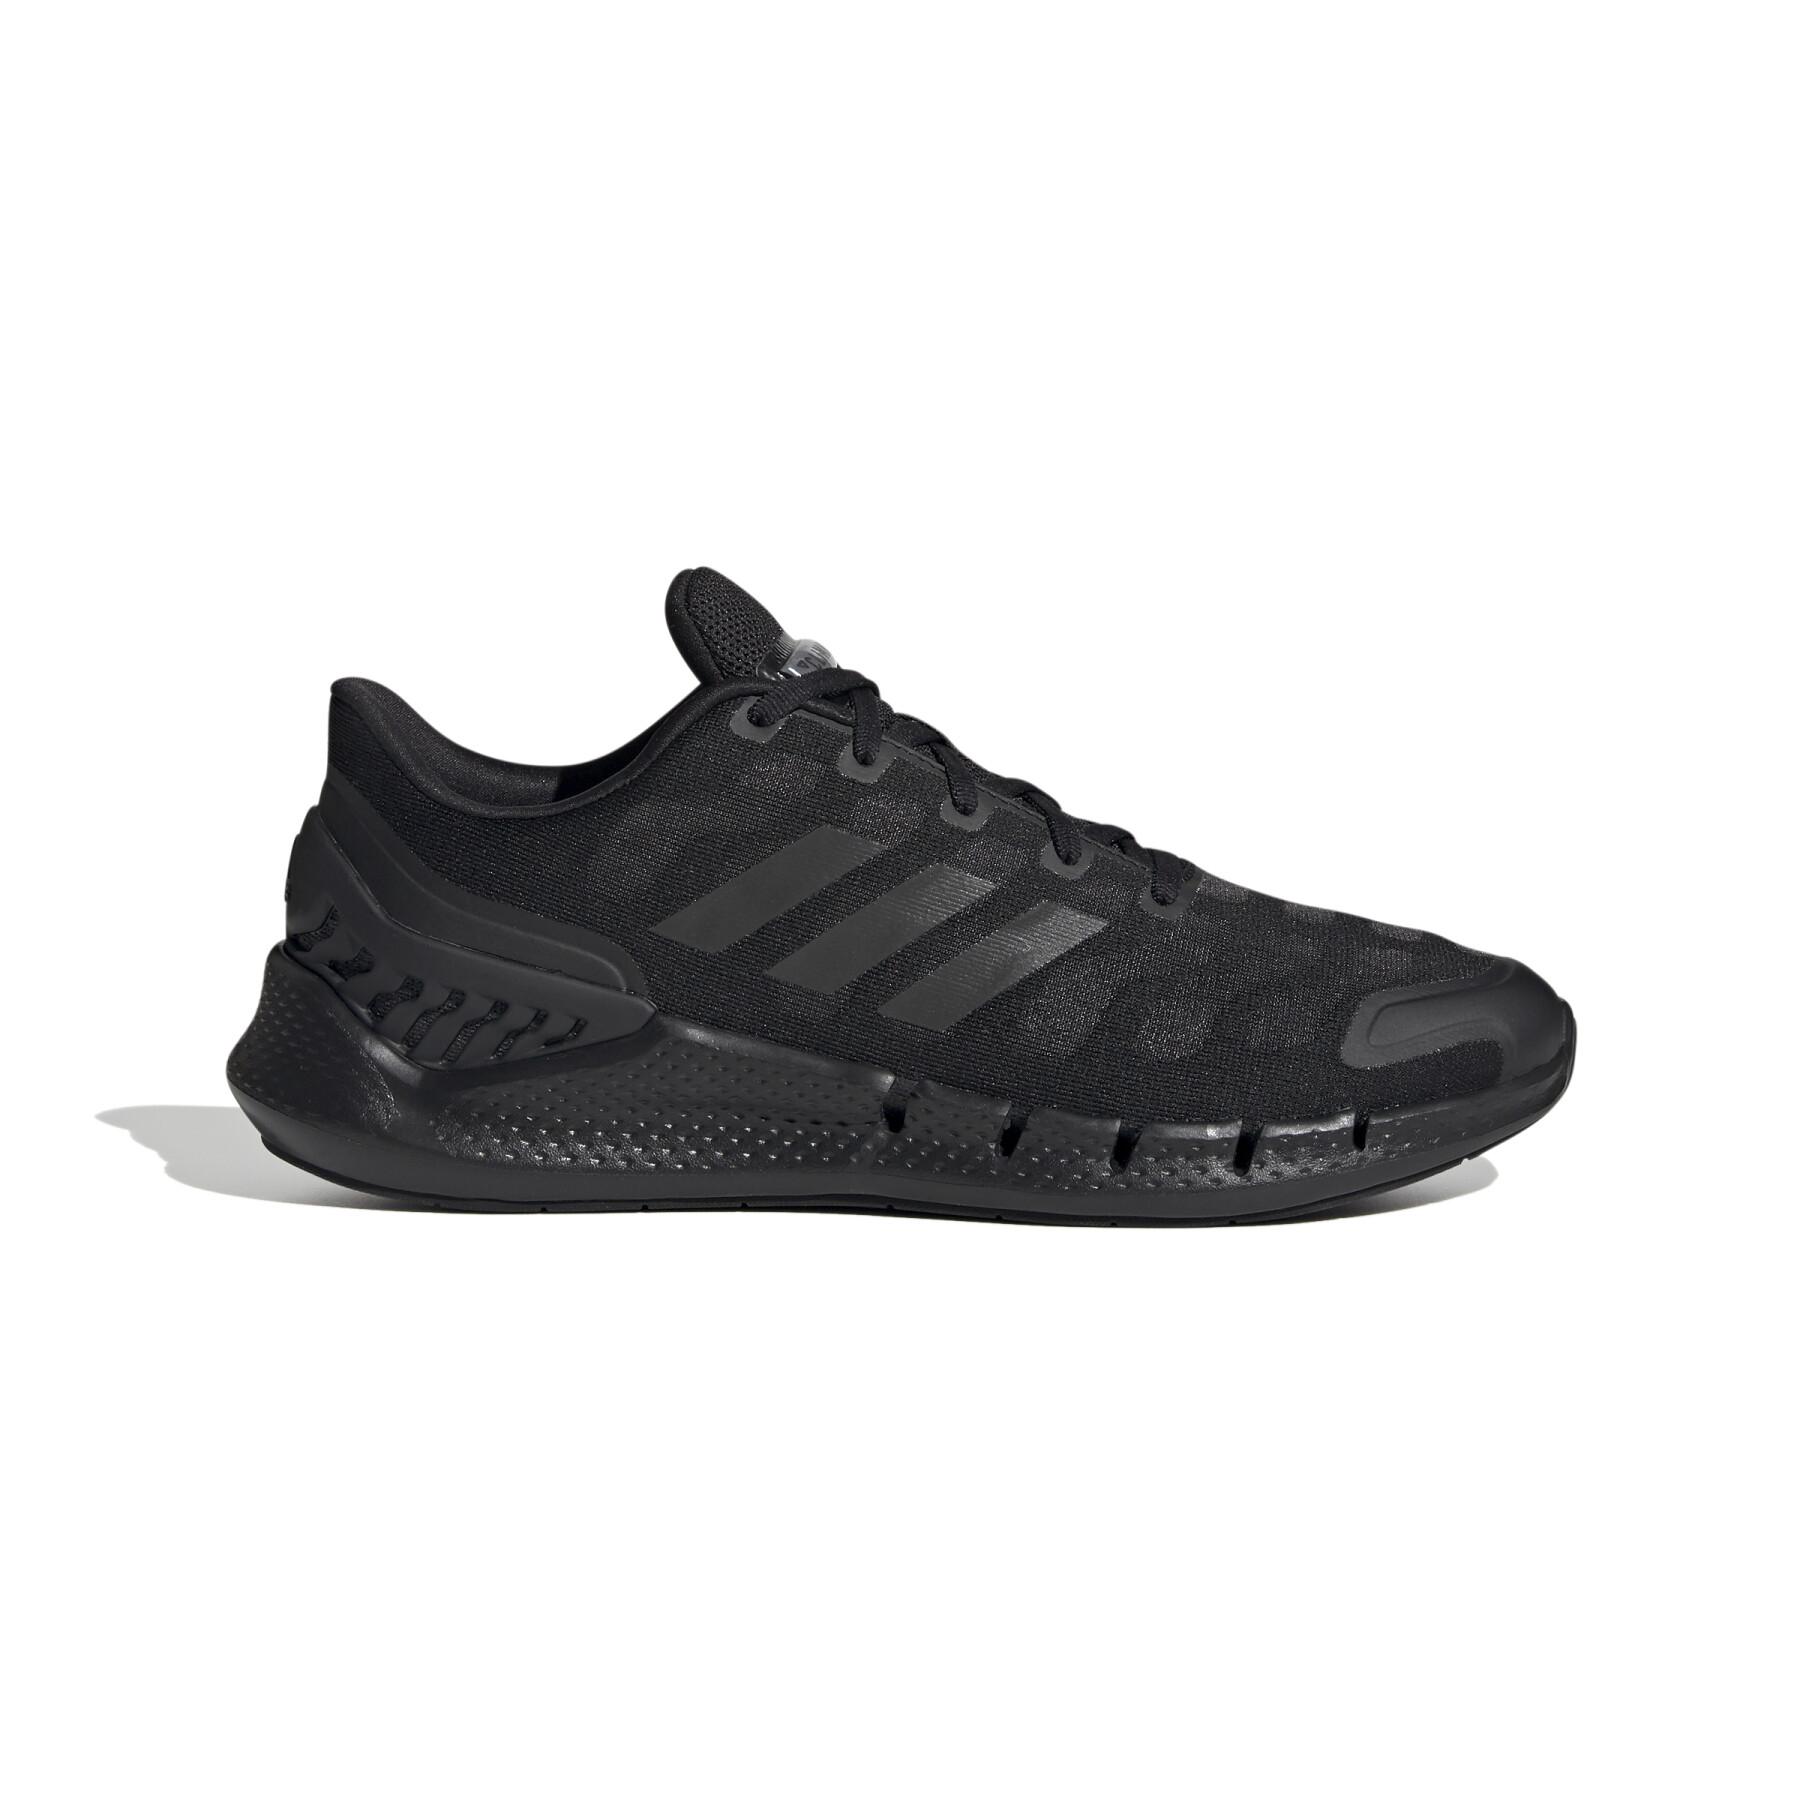 Adidas Climacool Shoes - Buy Adidas Climacool Shoes online in India